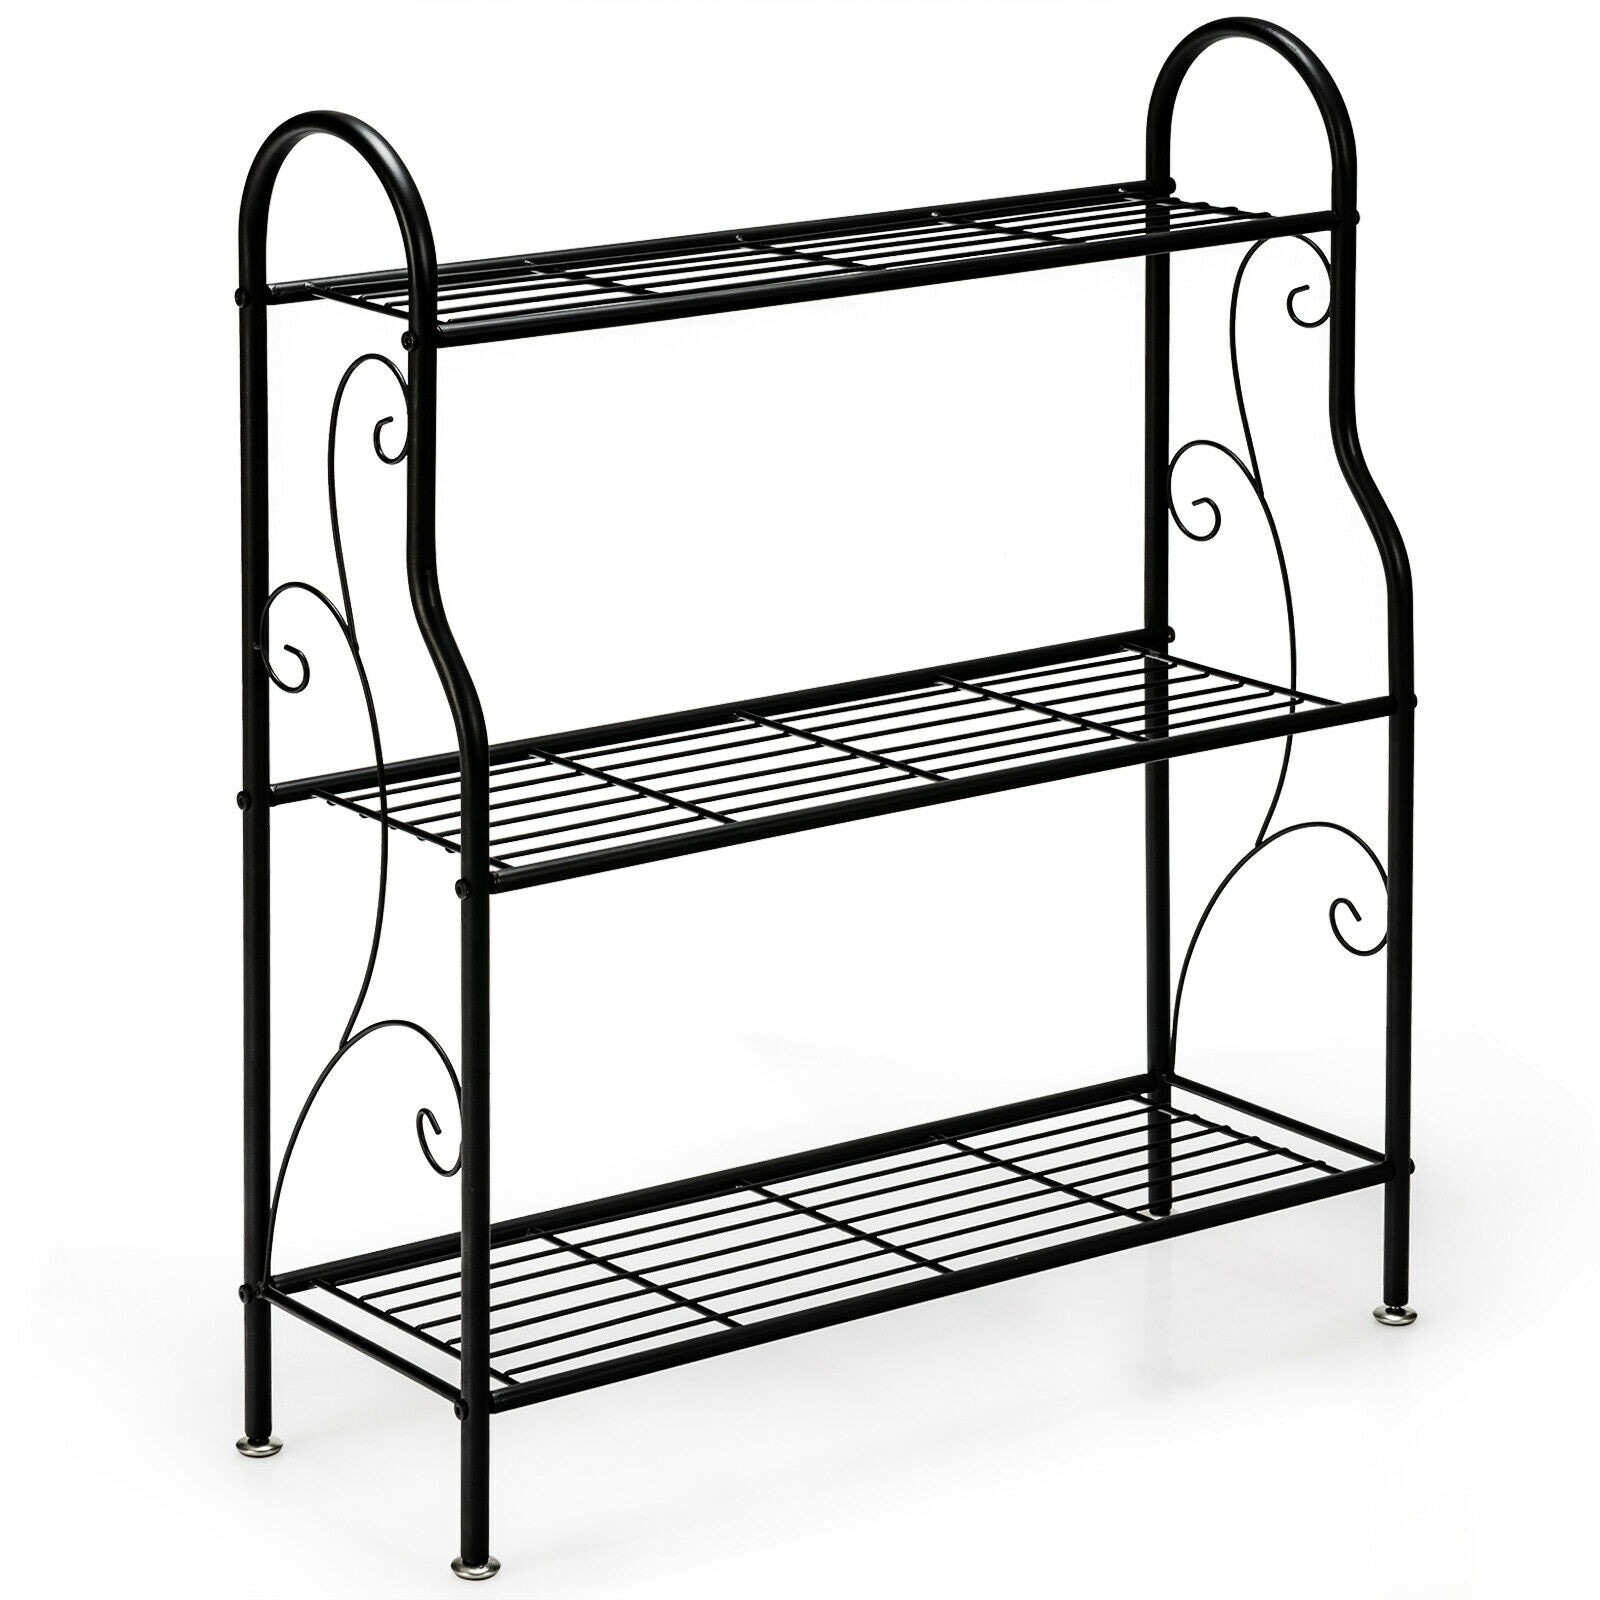 32" high Metal Wire Wrought Iron Basket Hall Shelf Planter Plant Stand w Liner 